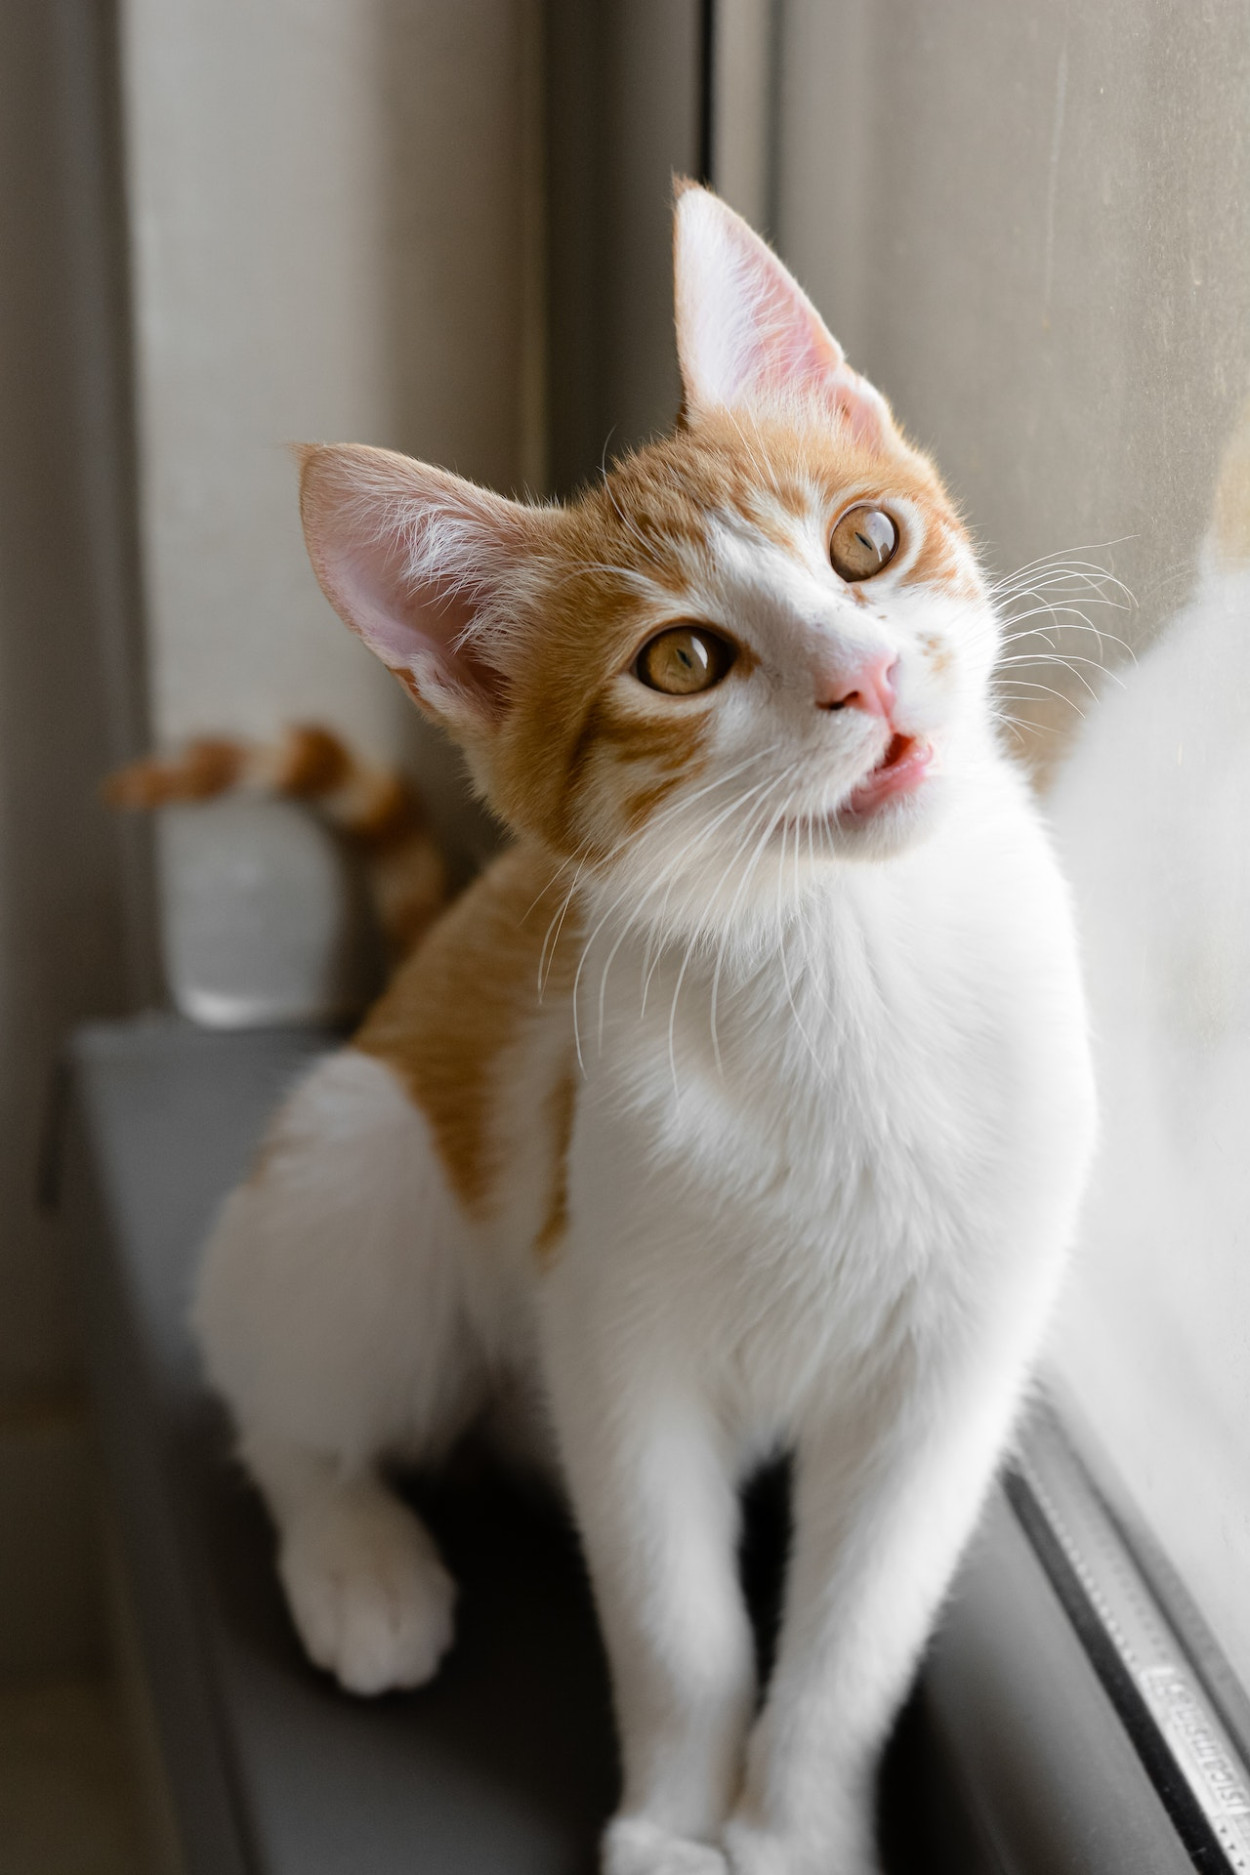 How Do Cats Communicate to Humans?